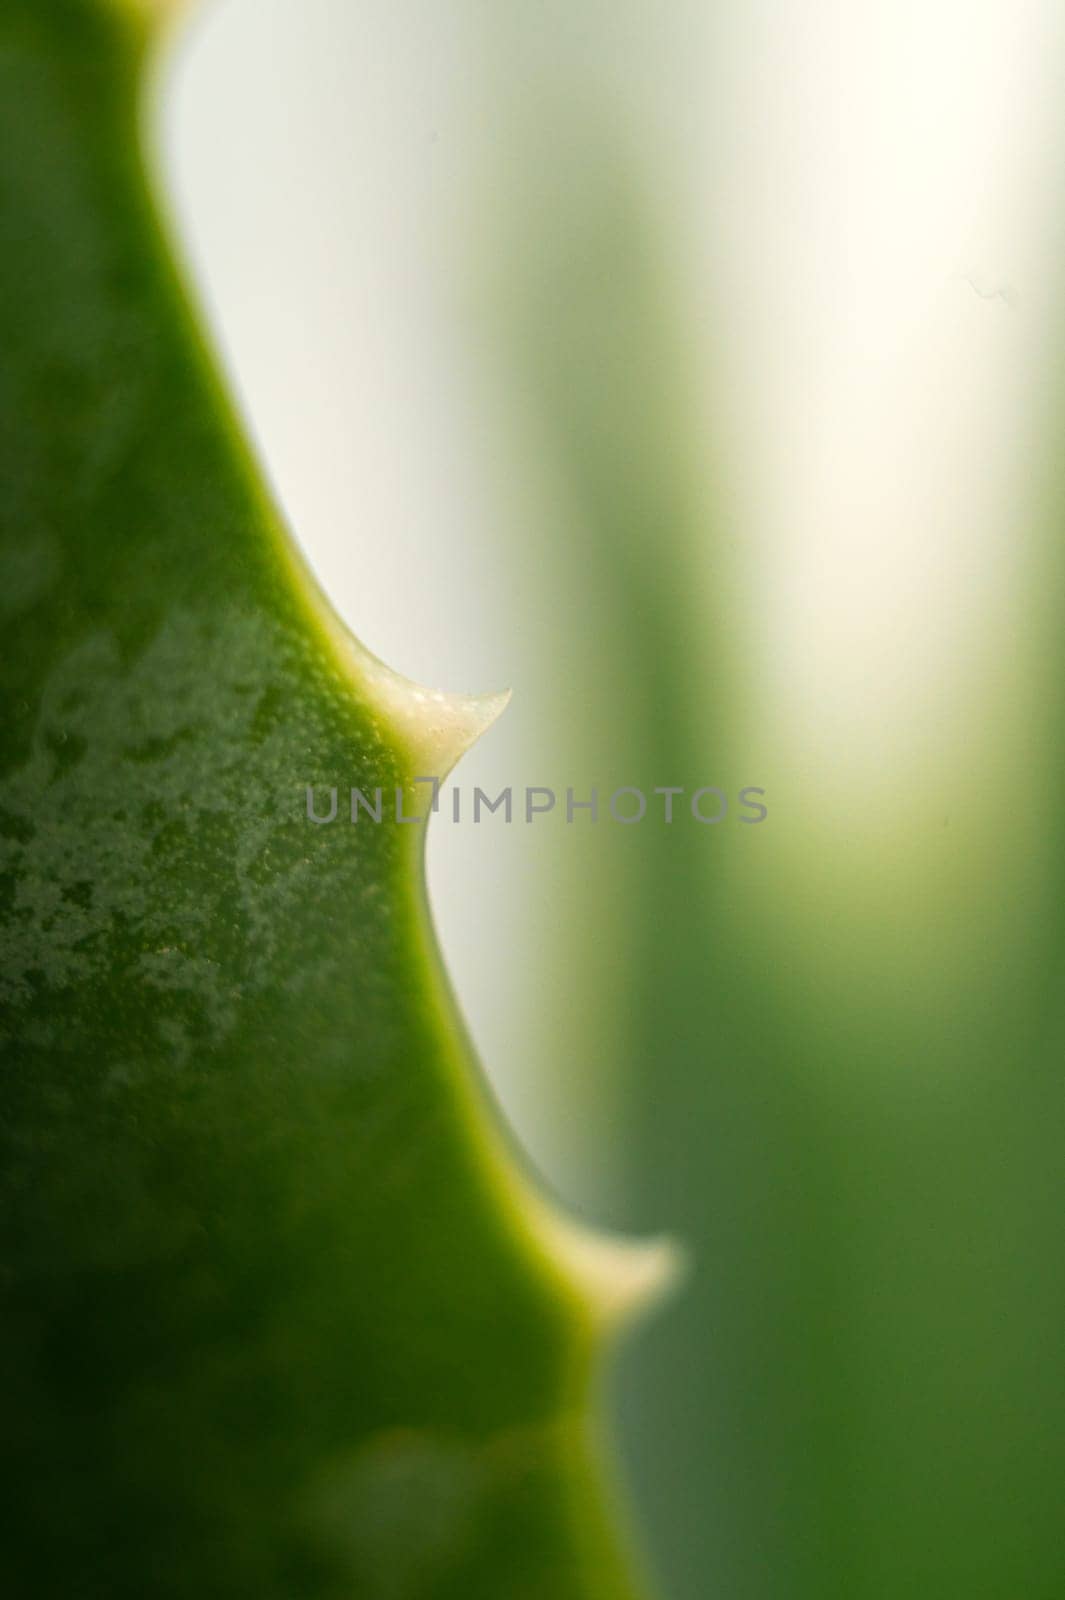 Extreme close-up of green succulent leaf of aloe vera flower exotic tropical plant with texture, isolated white background by artgf